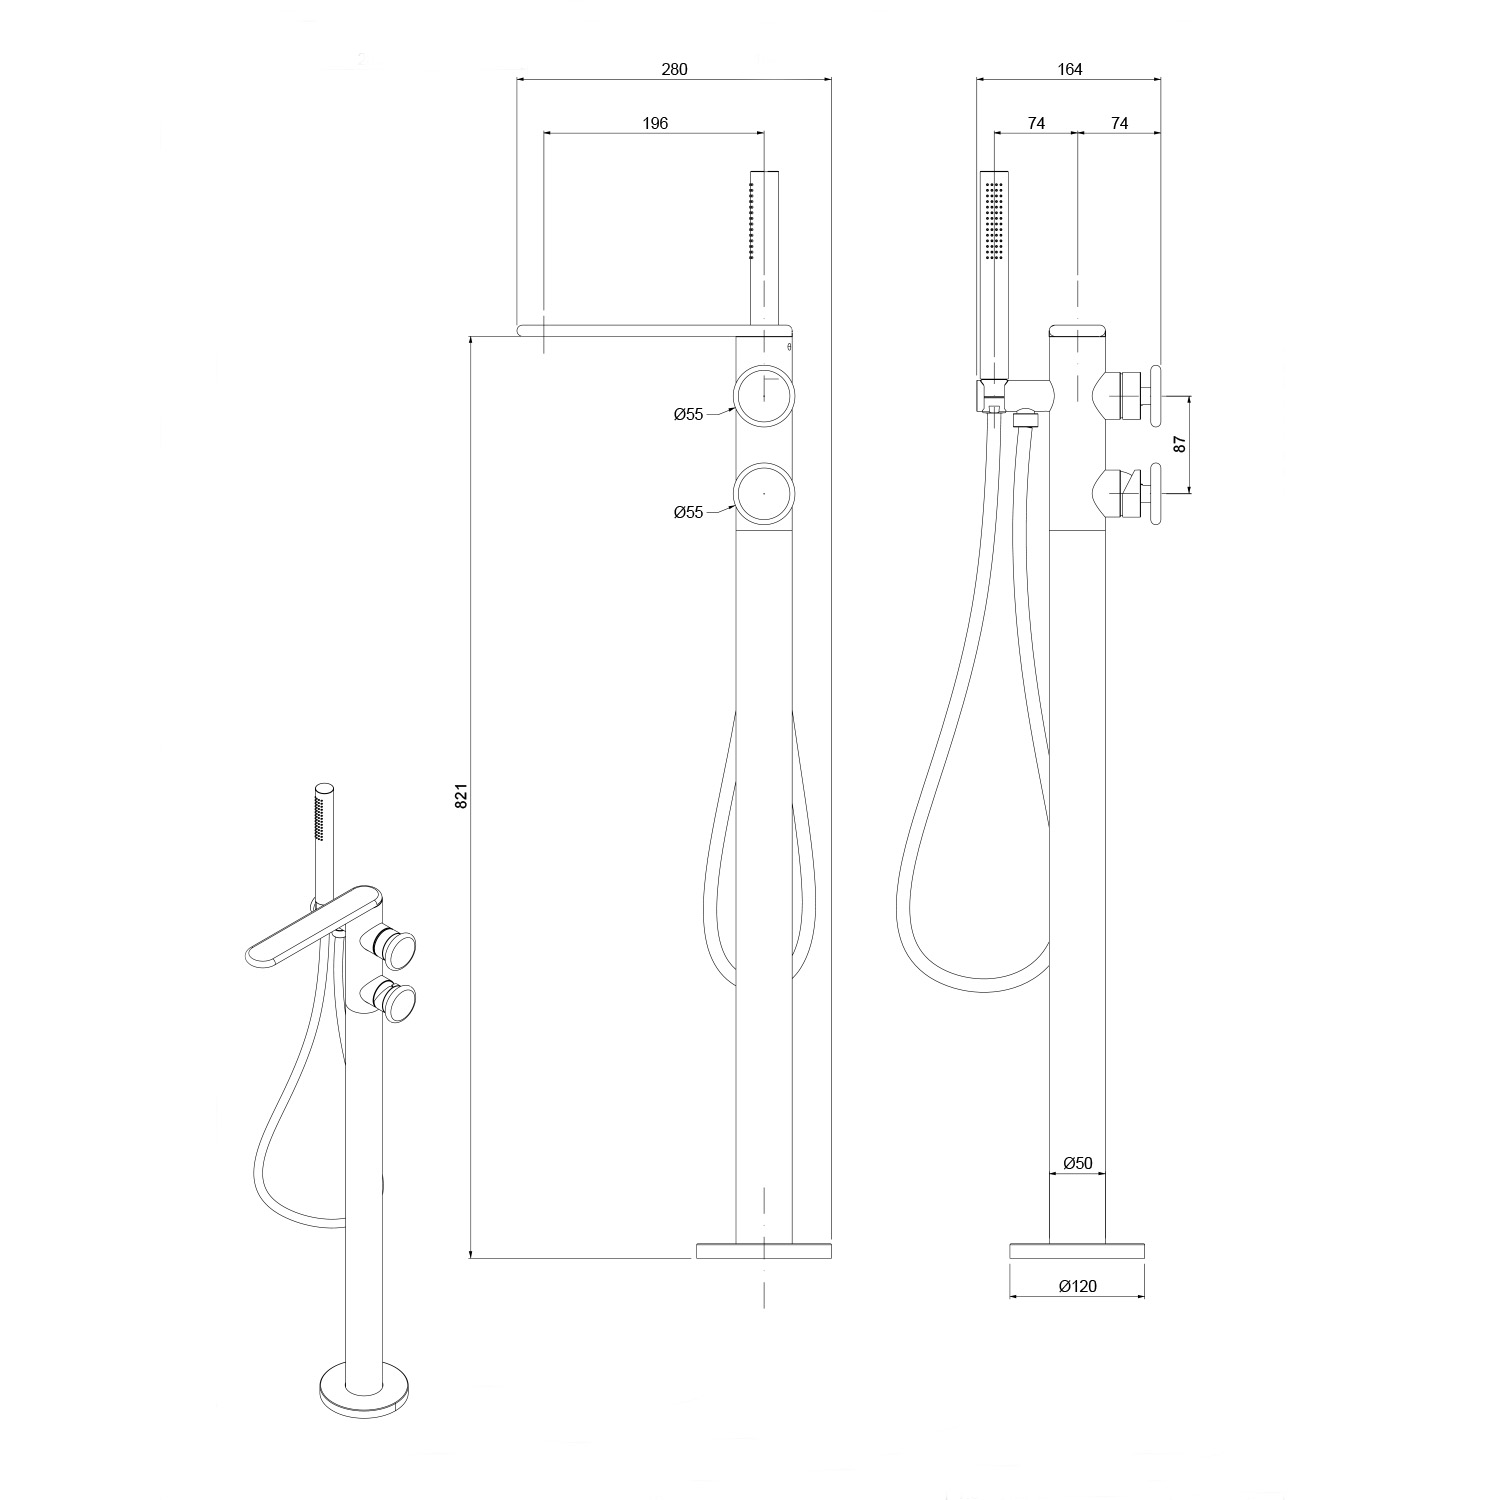 GLEP008WOC00 GLAM Floor Standing Bath Mixer With Hose & Hand Shower technical